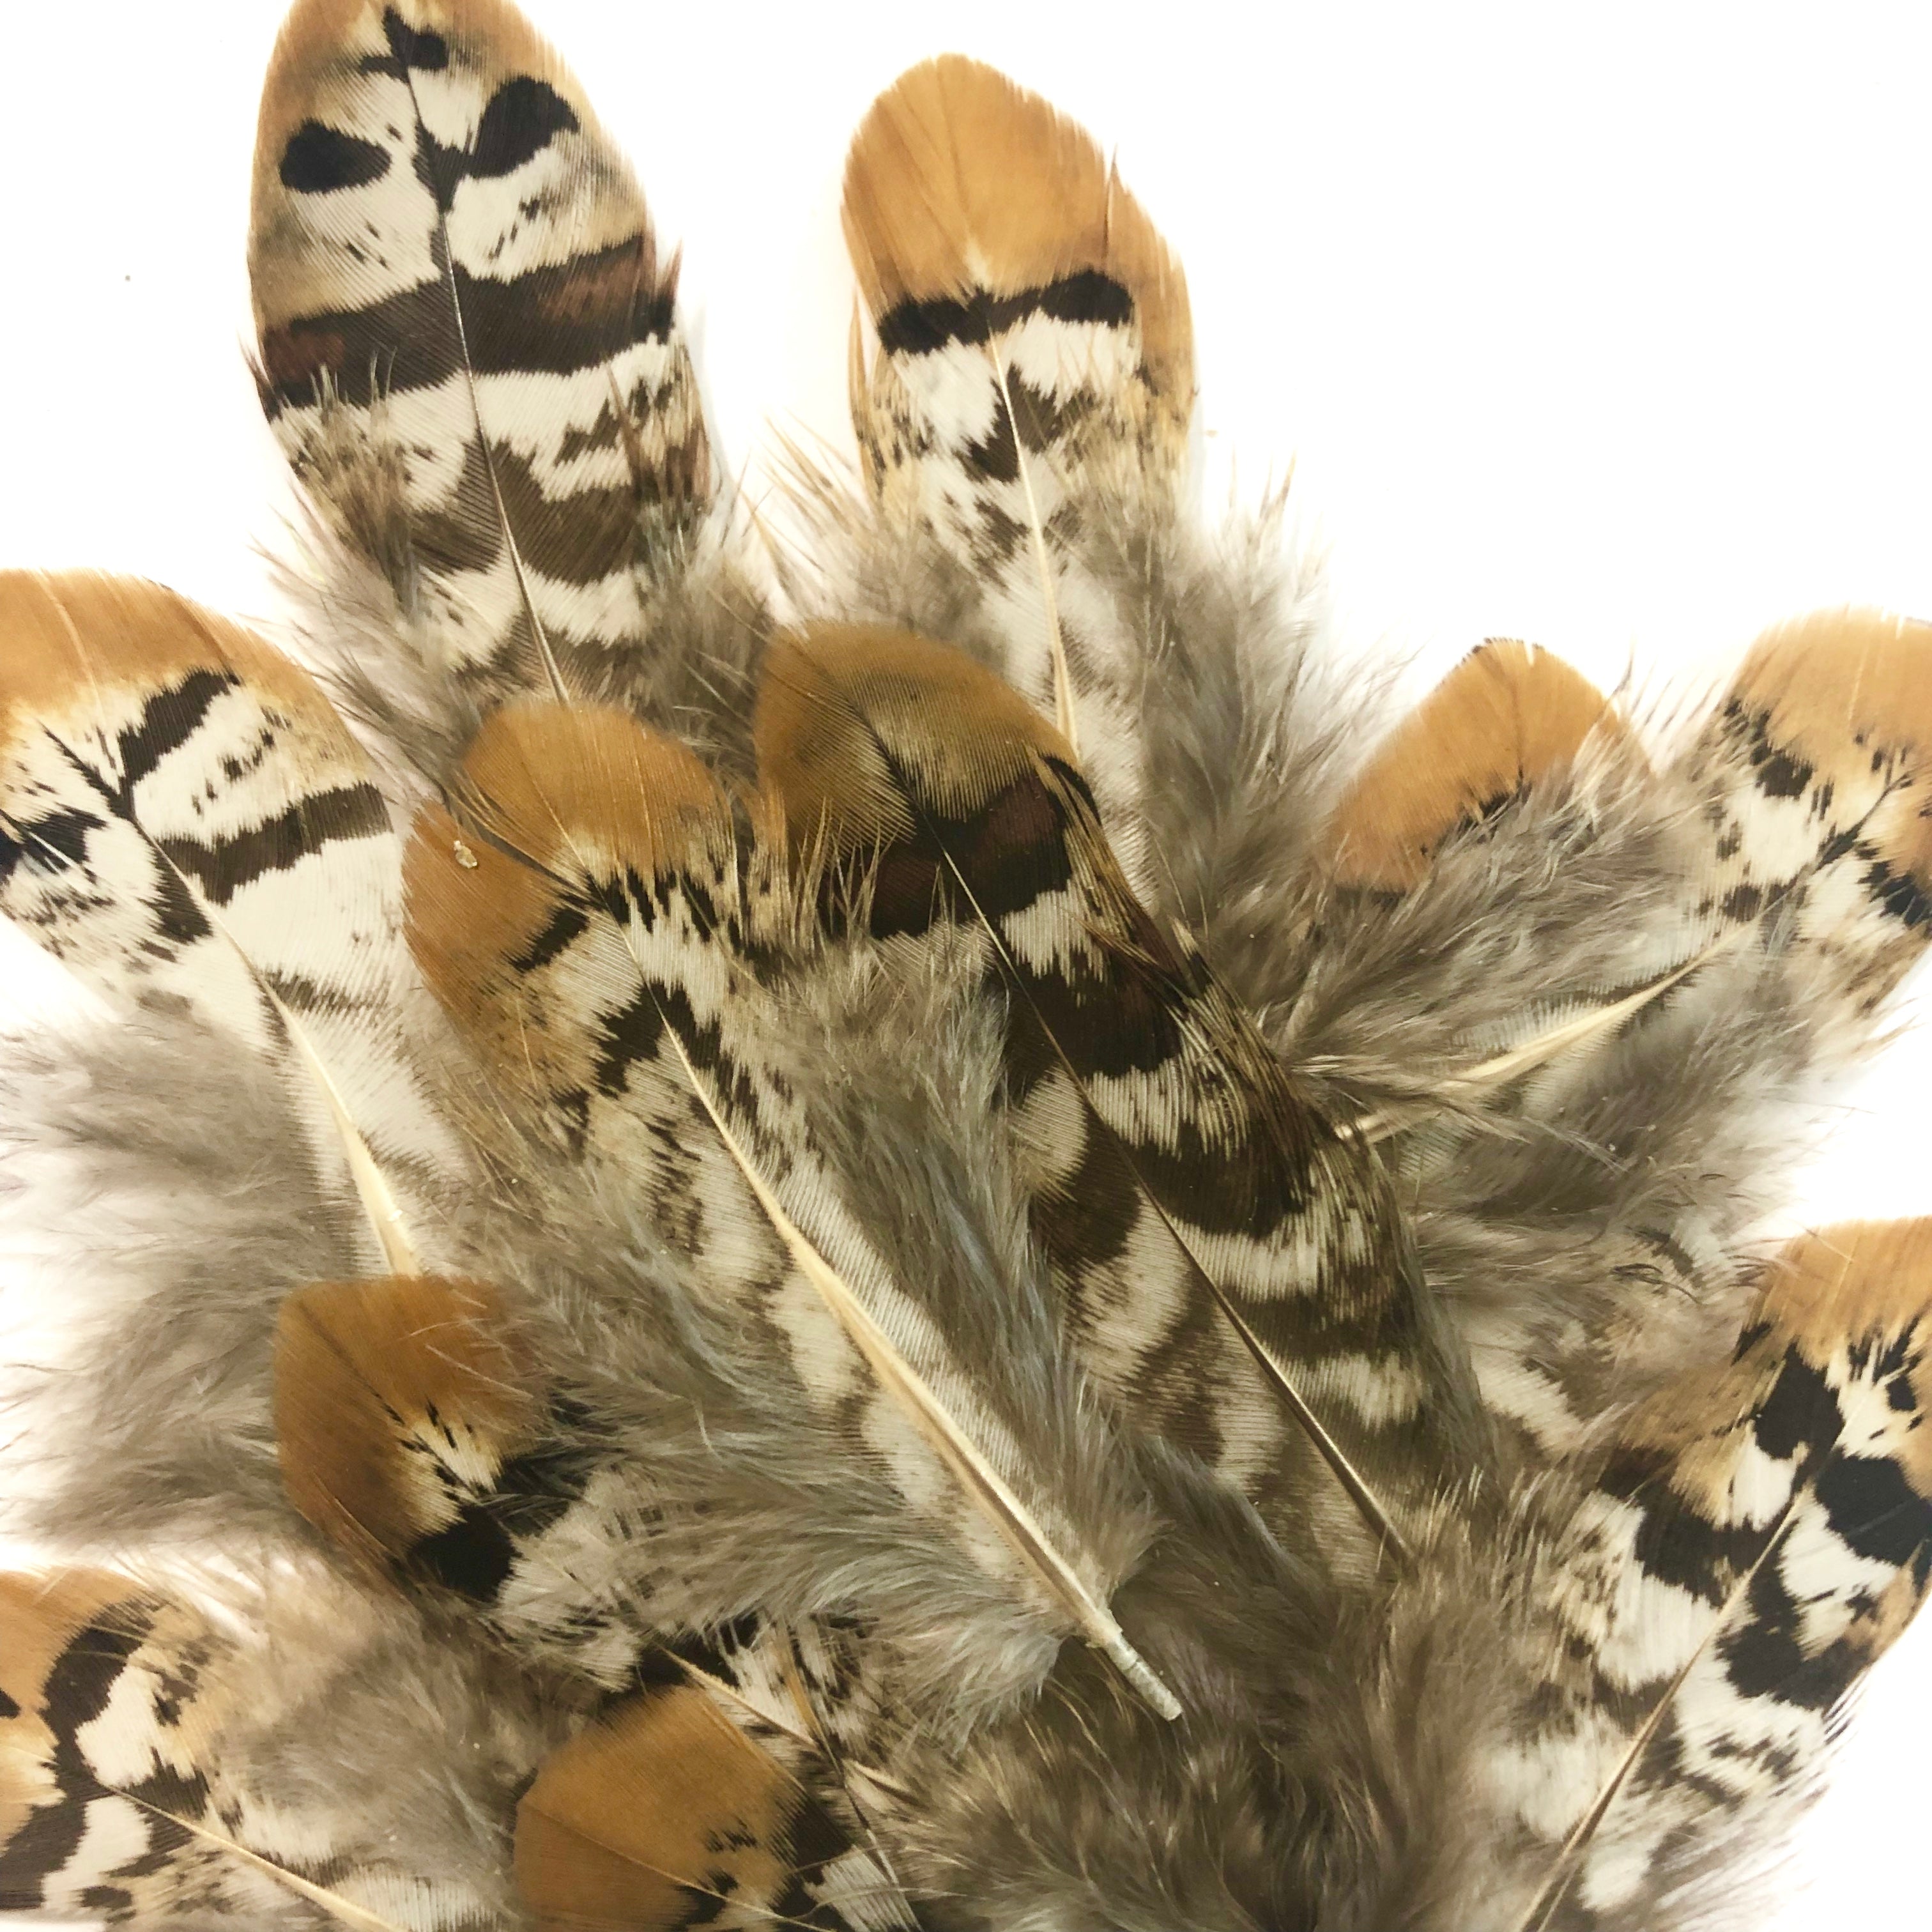 Natural Reeves Pheasant Plumage Feathers x 10pcs